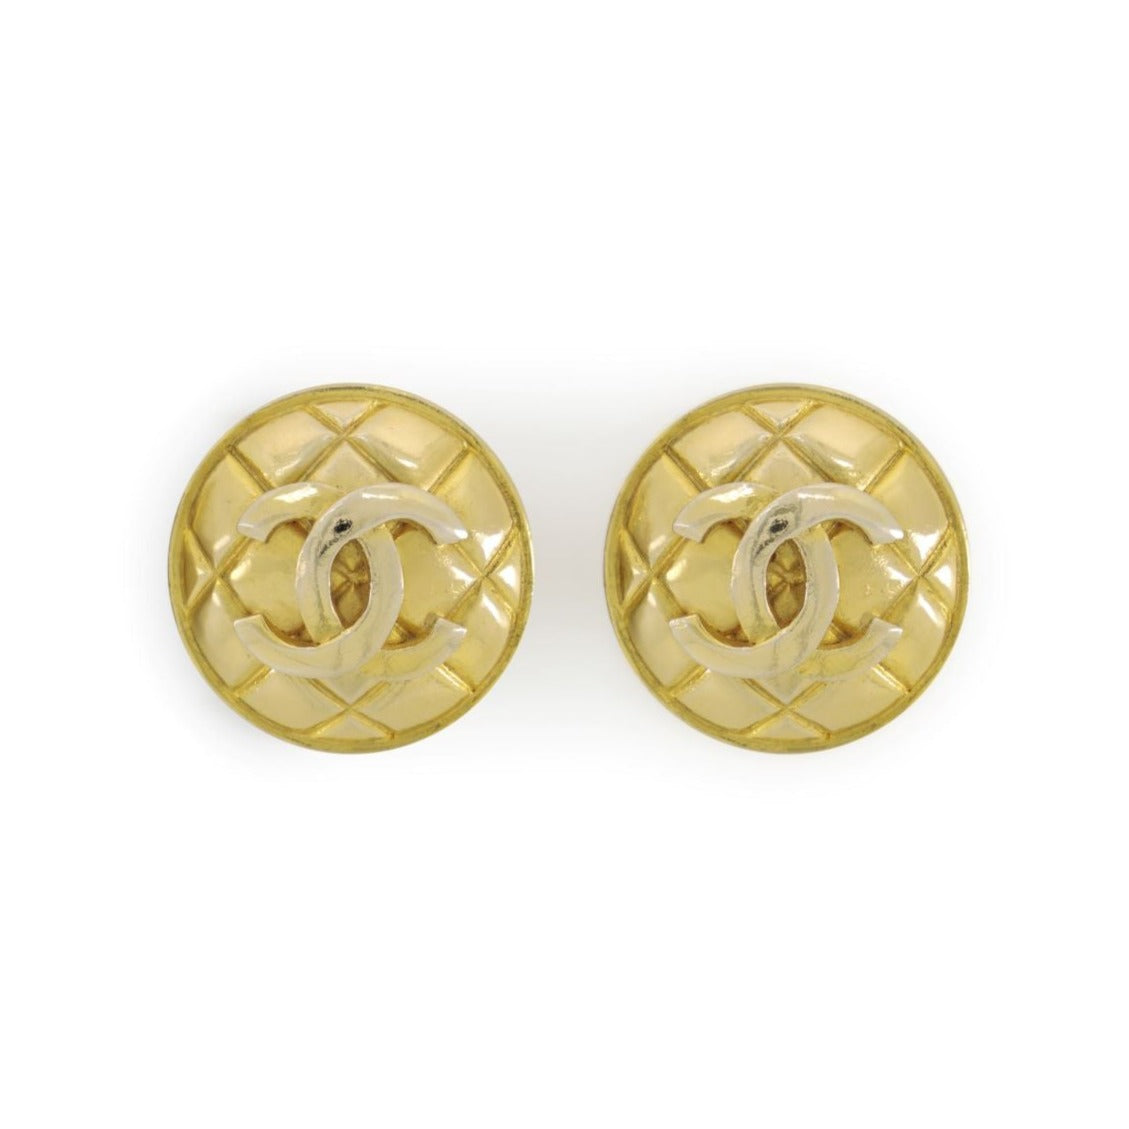 Vintage Chanel earrings with quilted button design